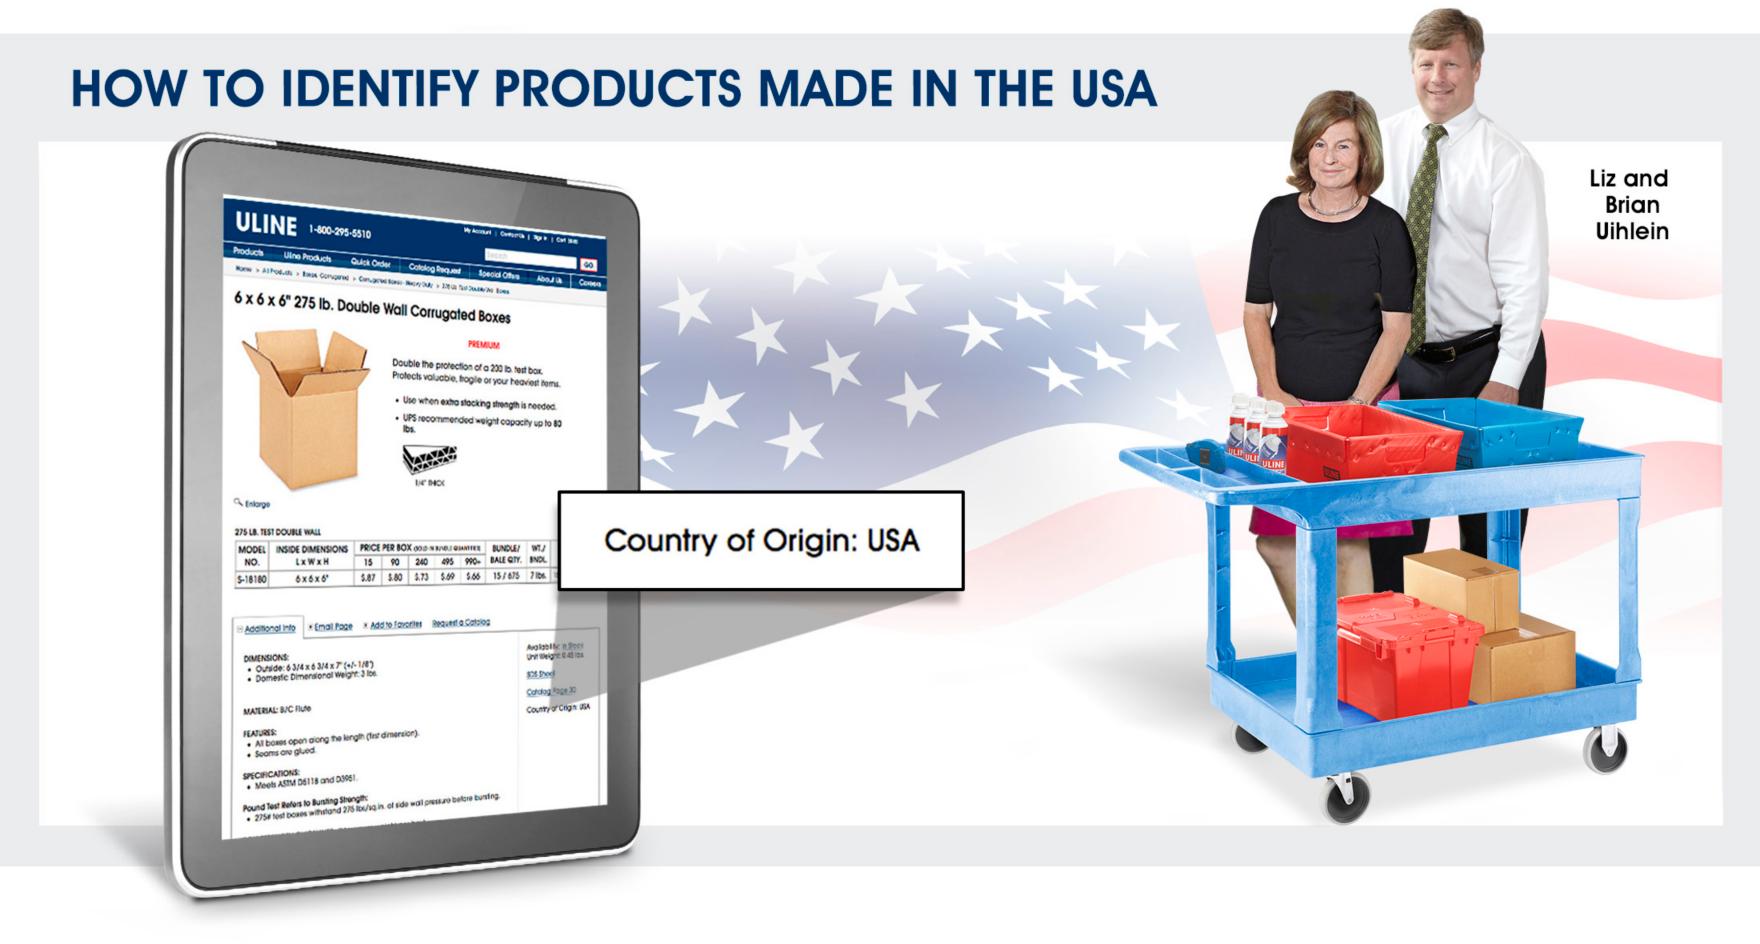 How To Identfy Products Made In The USA